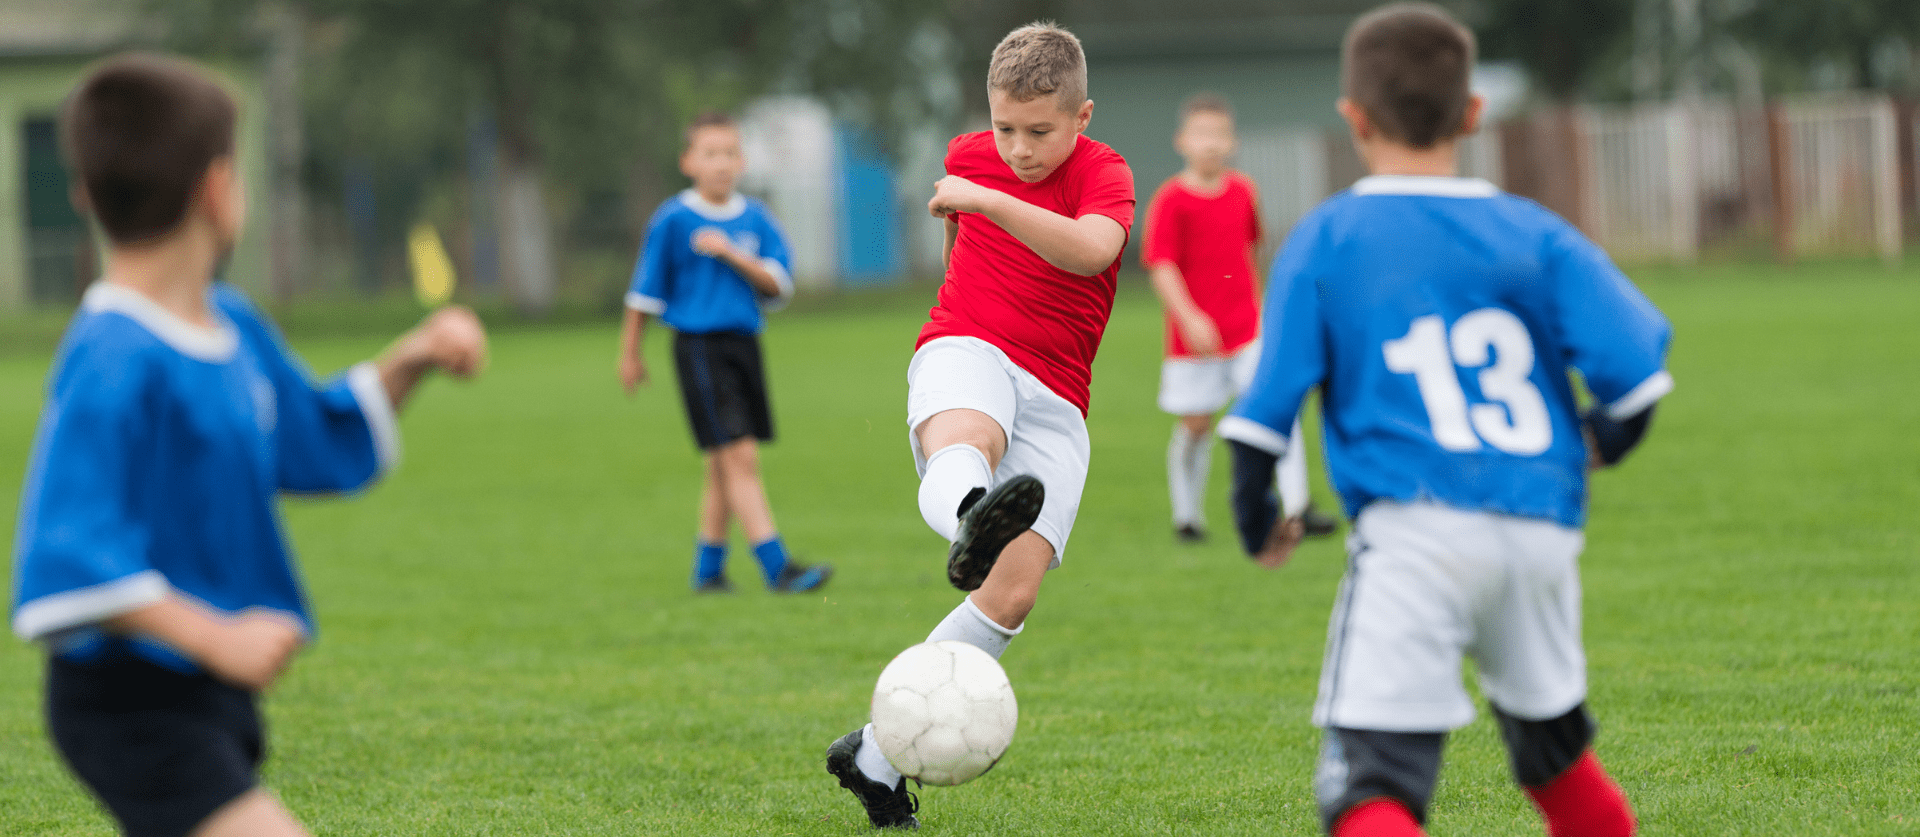 The Many Benefits of Youth Sports in your Community